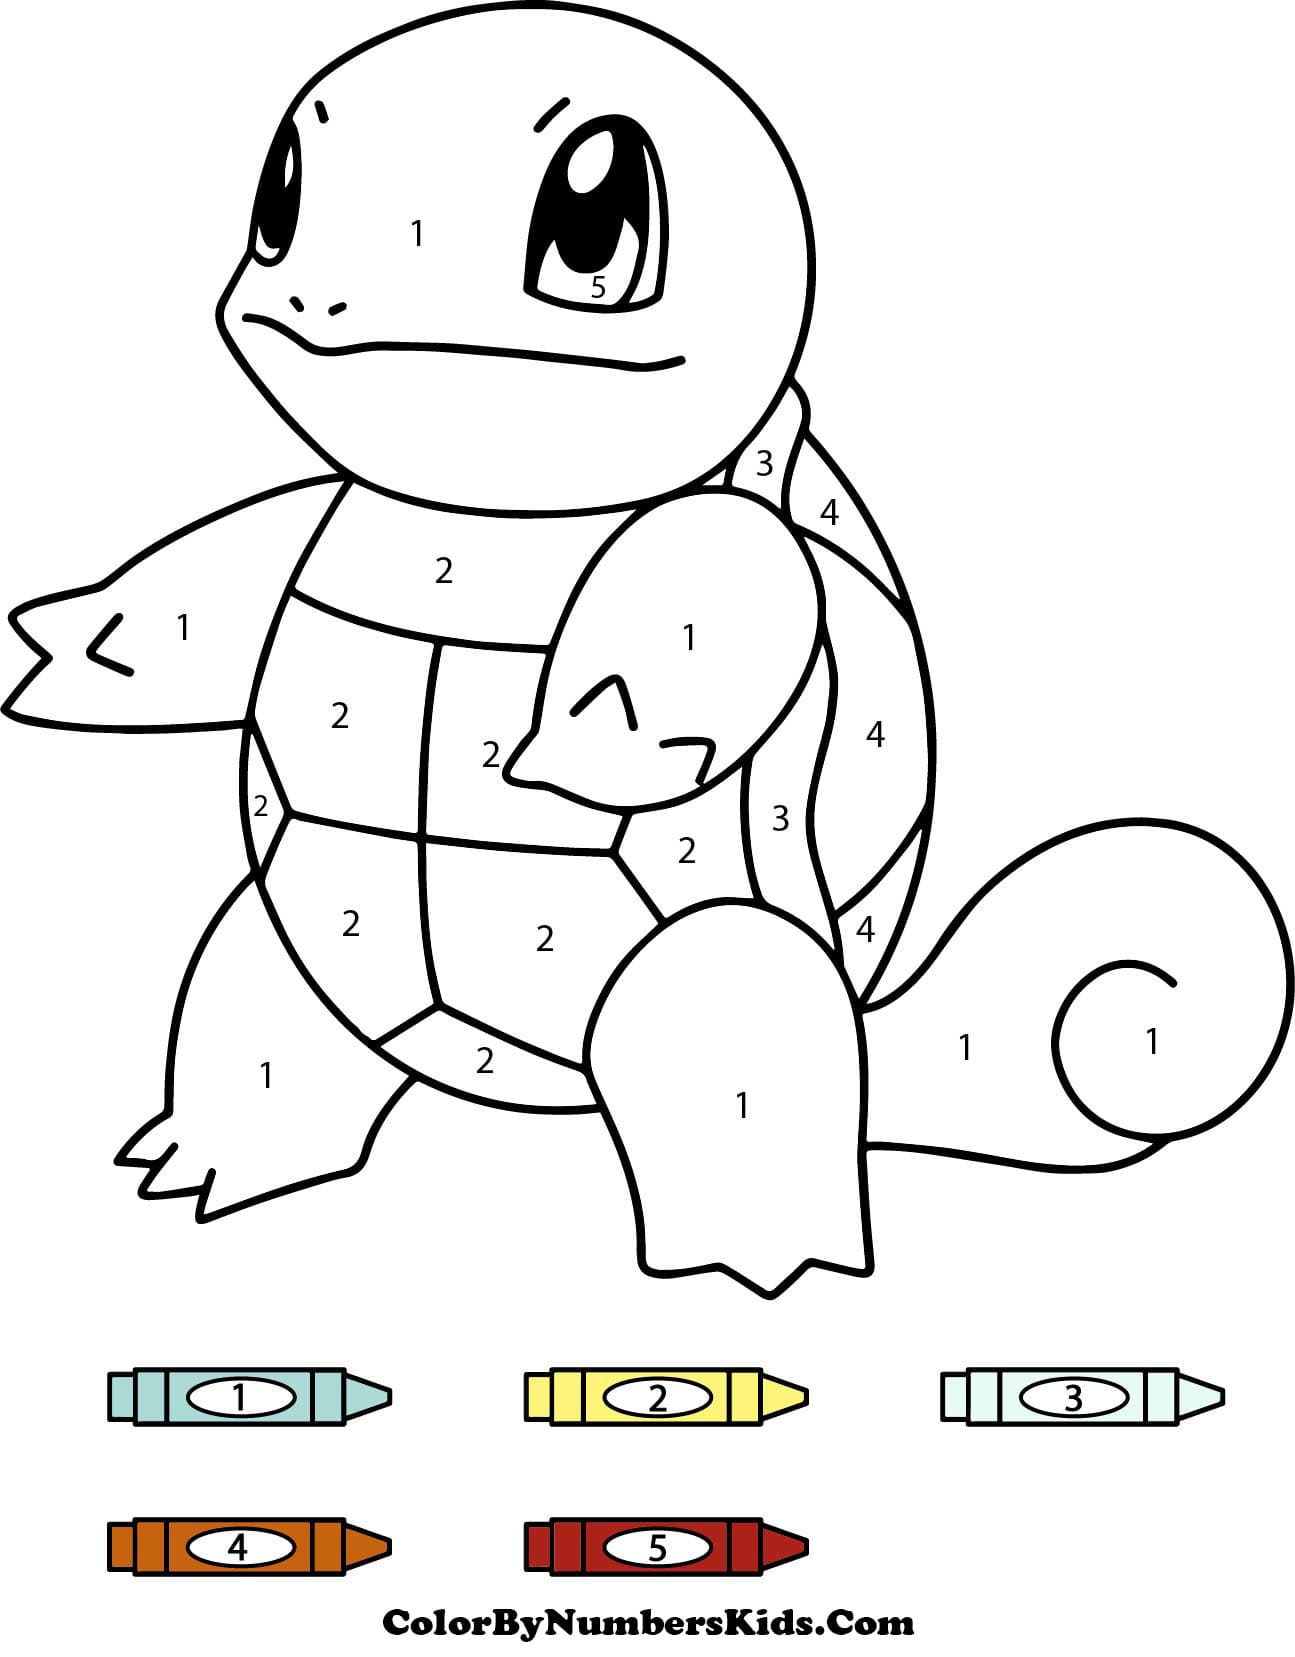 Squirtle Pokemon Color By Numbers